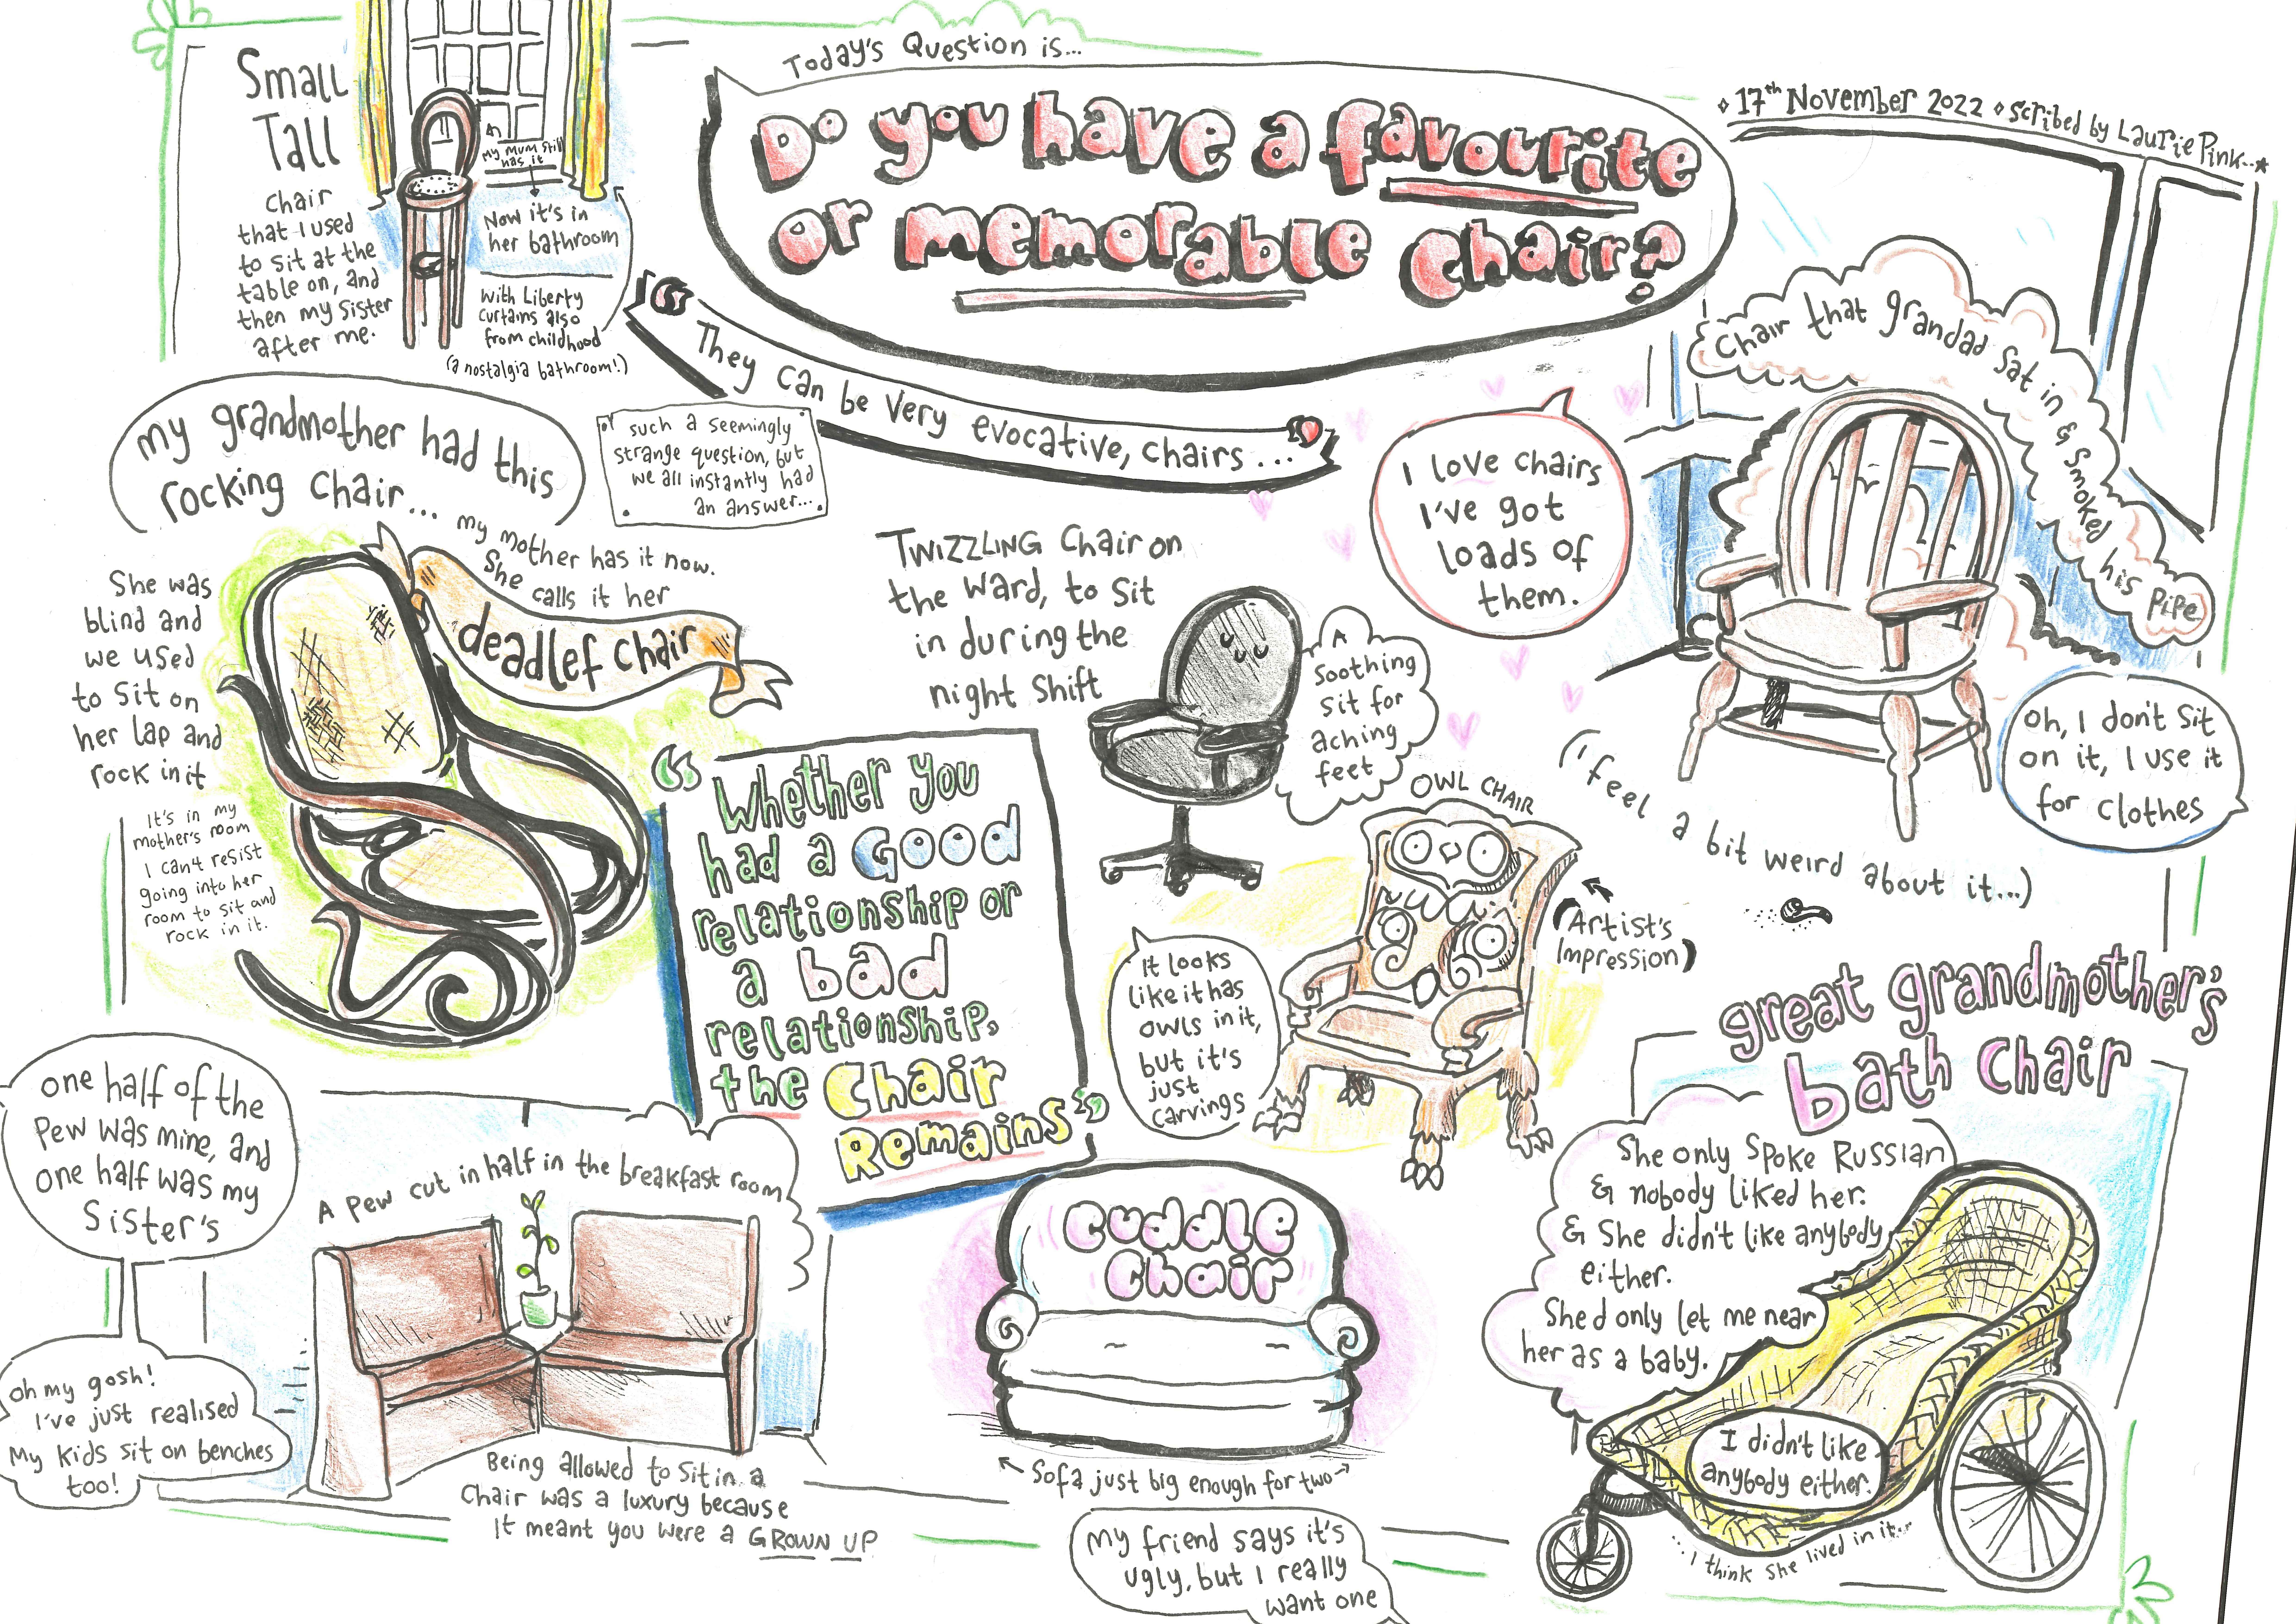 A drawing of chairs and some comments about chairs by Laurie Pink